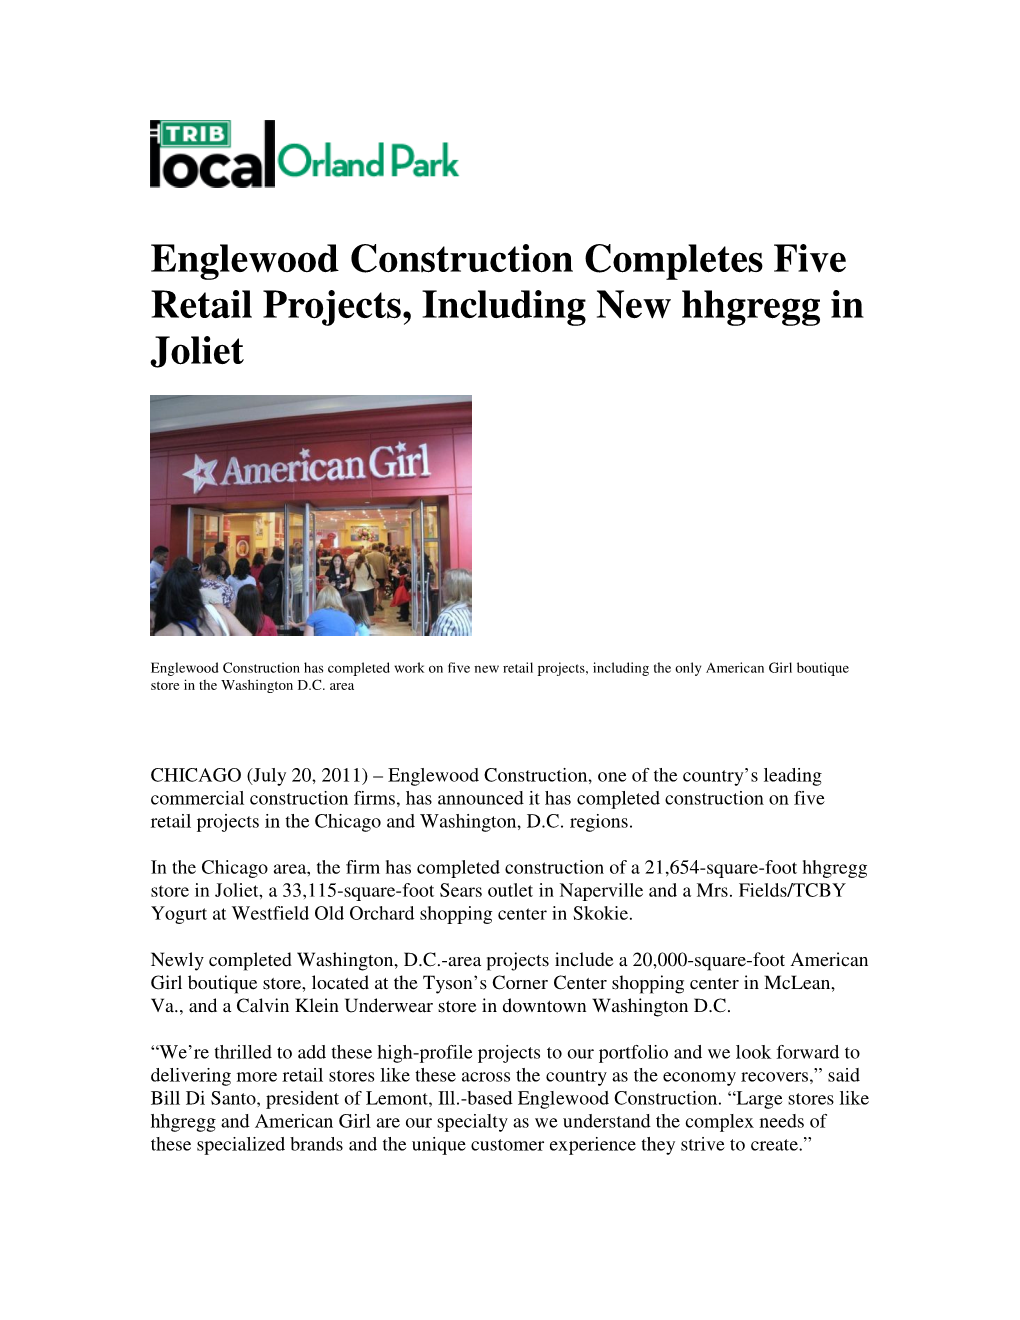 Englewood Construction Completes Five Retail Projects, Including New Hhgregg in Joliet